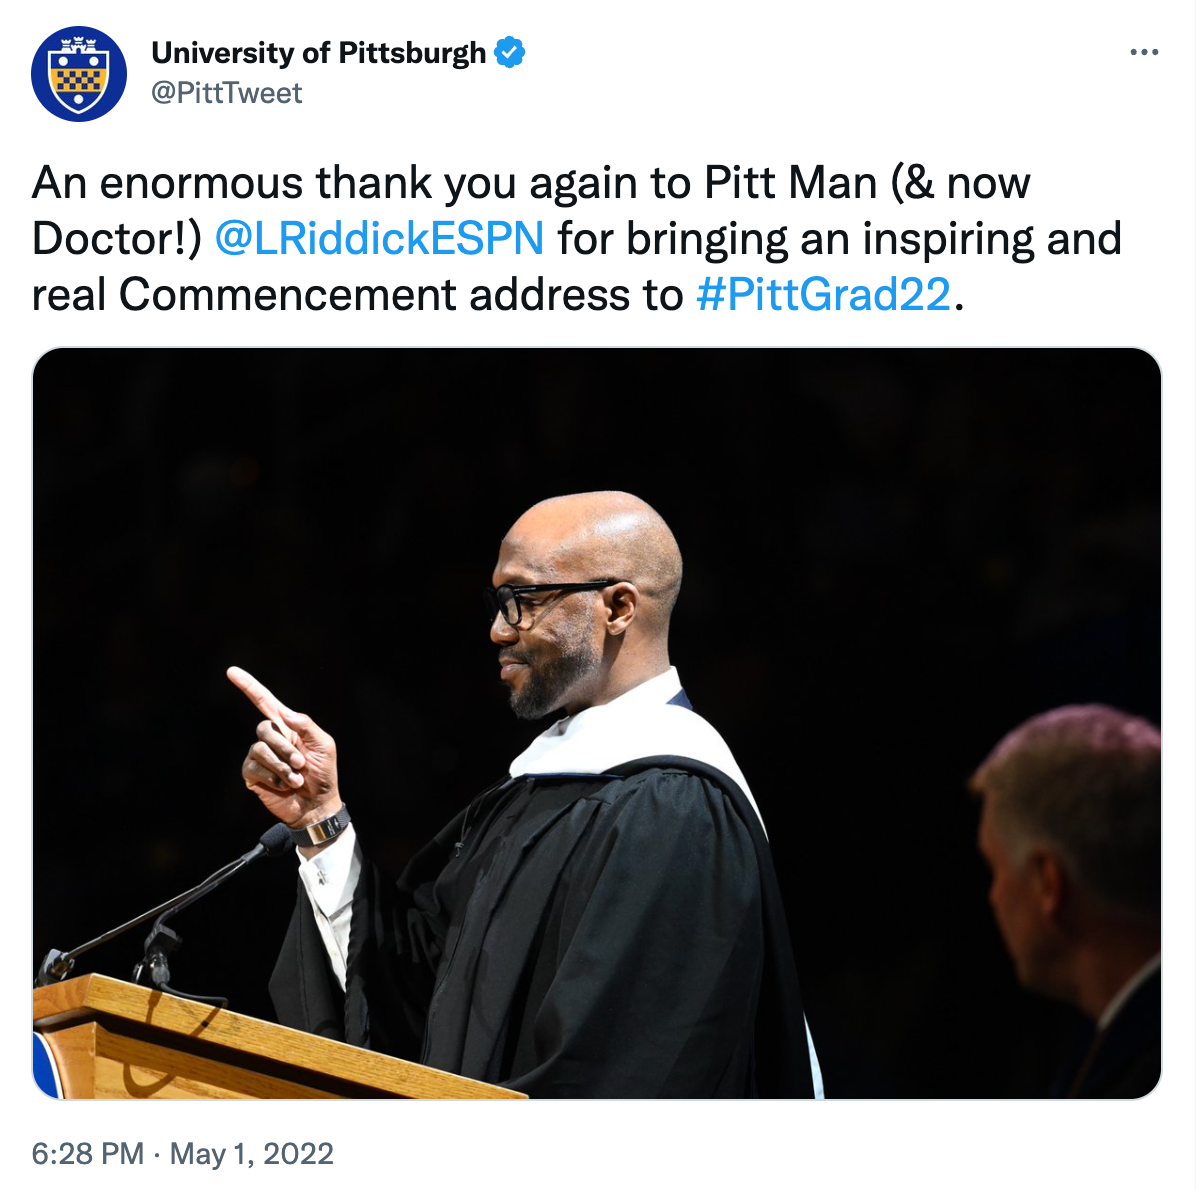 A tweet from the University of Pittsburgh shows Louis Riddick delivering a speech. The text reads An enormous thank you again to Pitt Man (& now doctor!) @LRiddickESPN for bringing an inspiring and real Commencement address to #PittGrad22.